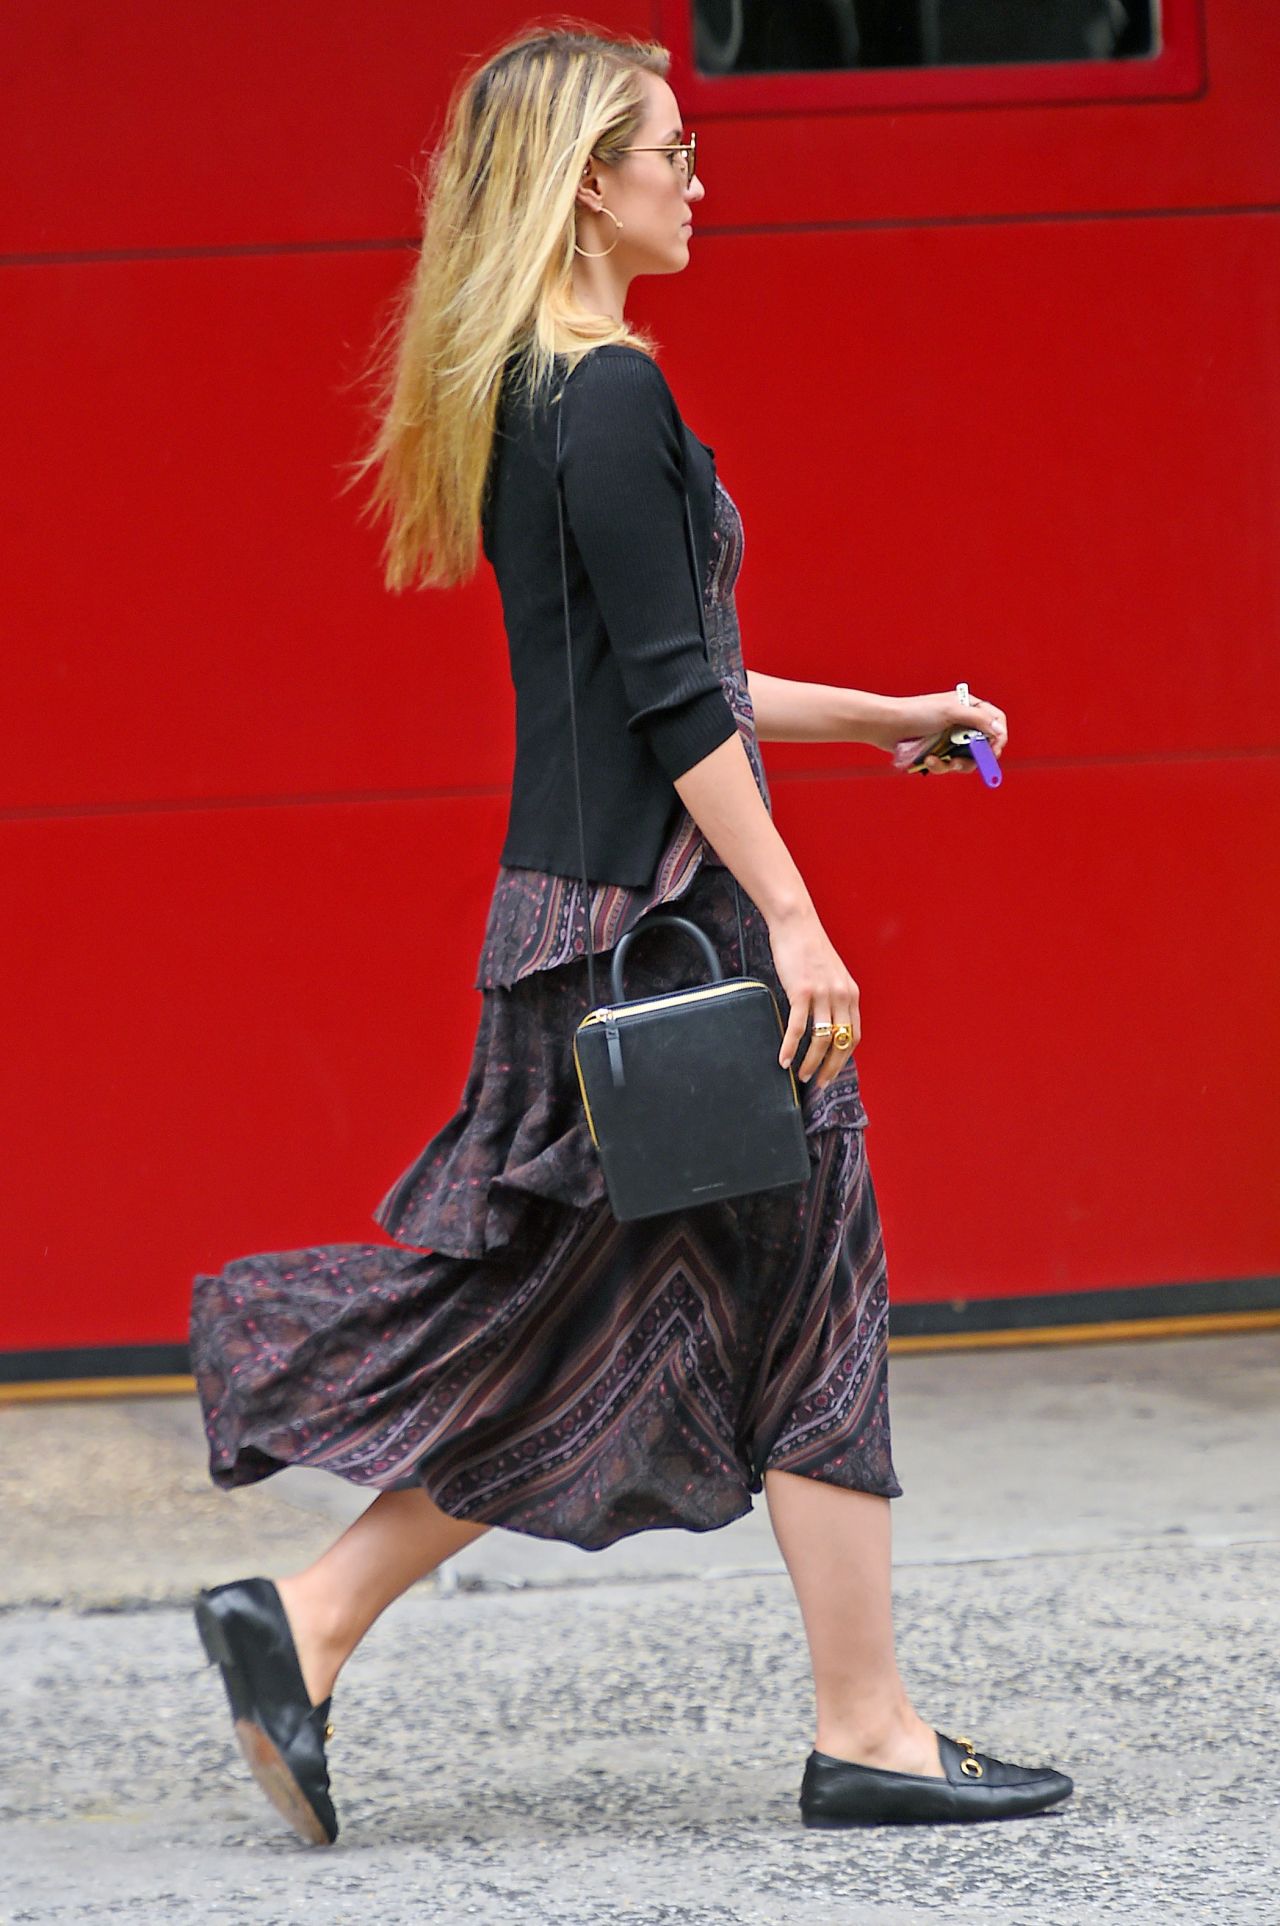 dianna-agron-out-in-new-york-city-06-28-2018-2.jpg